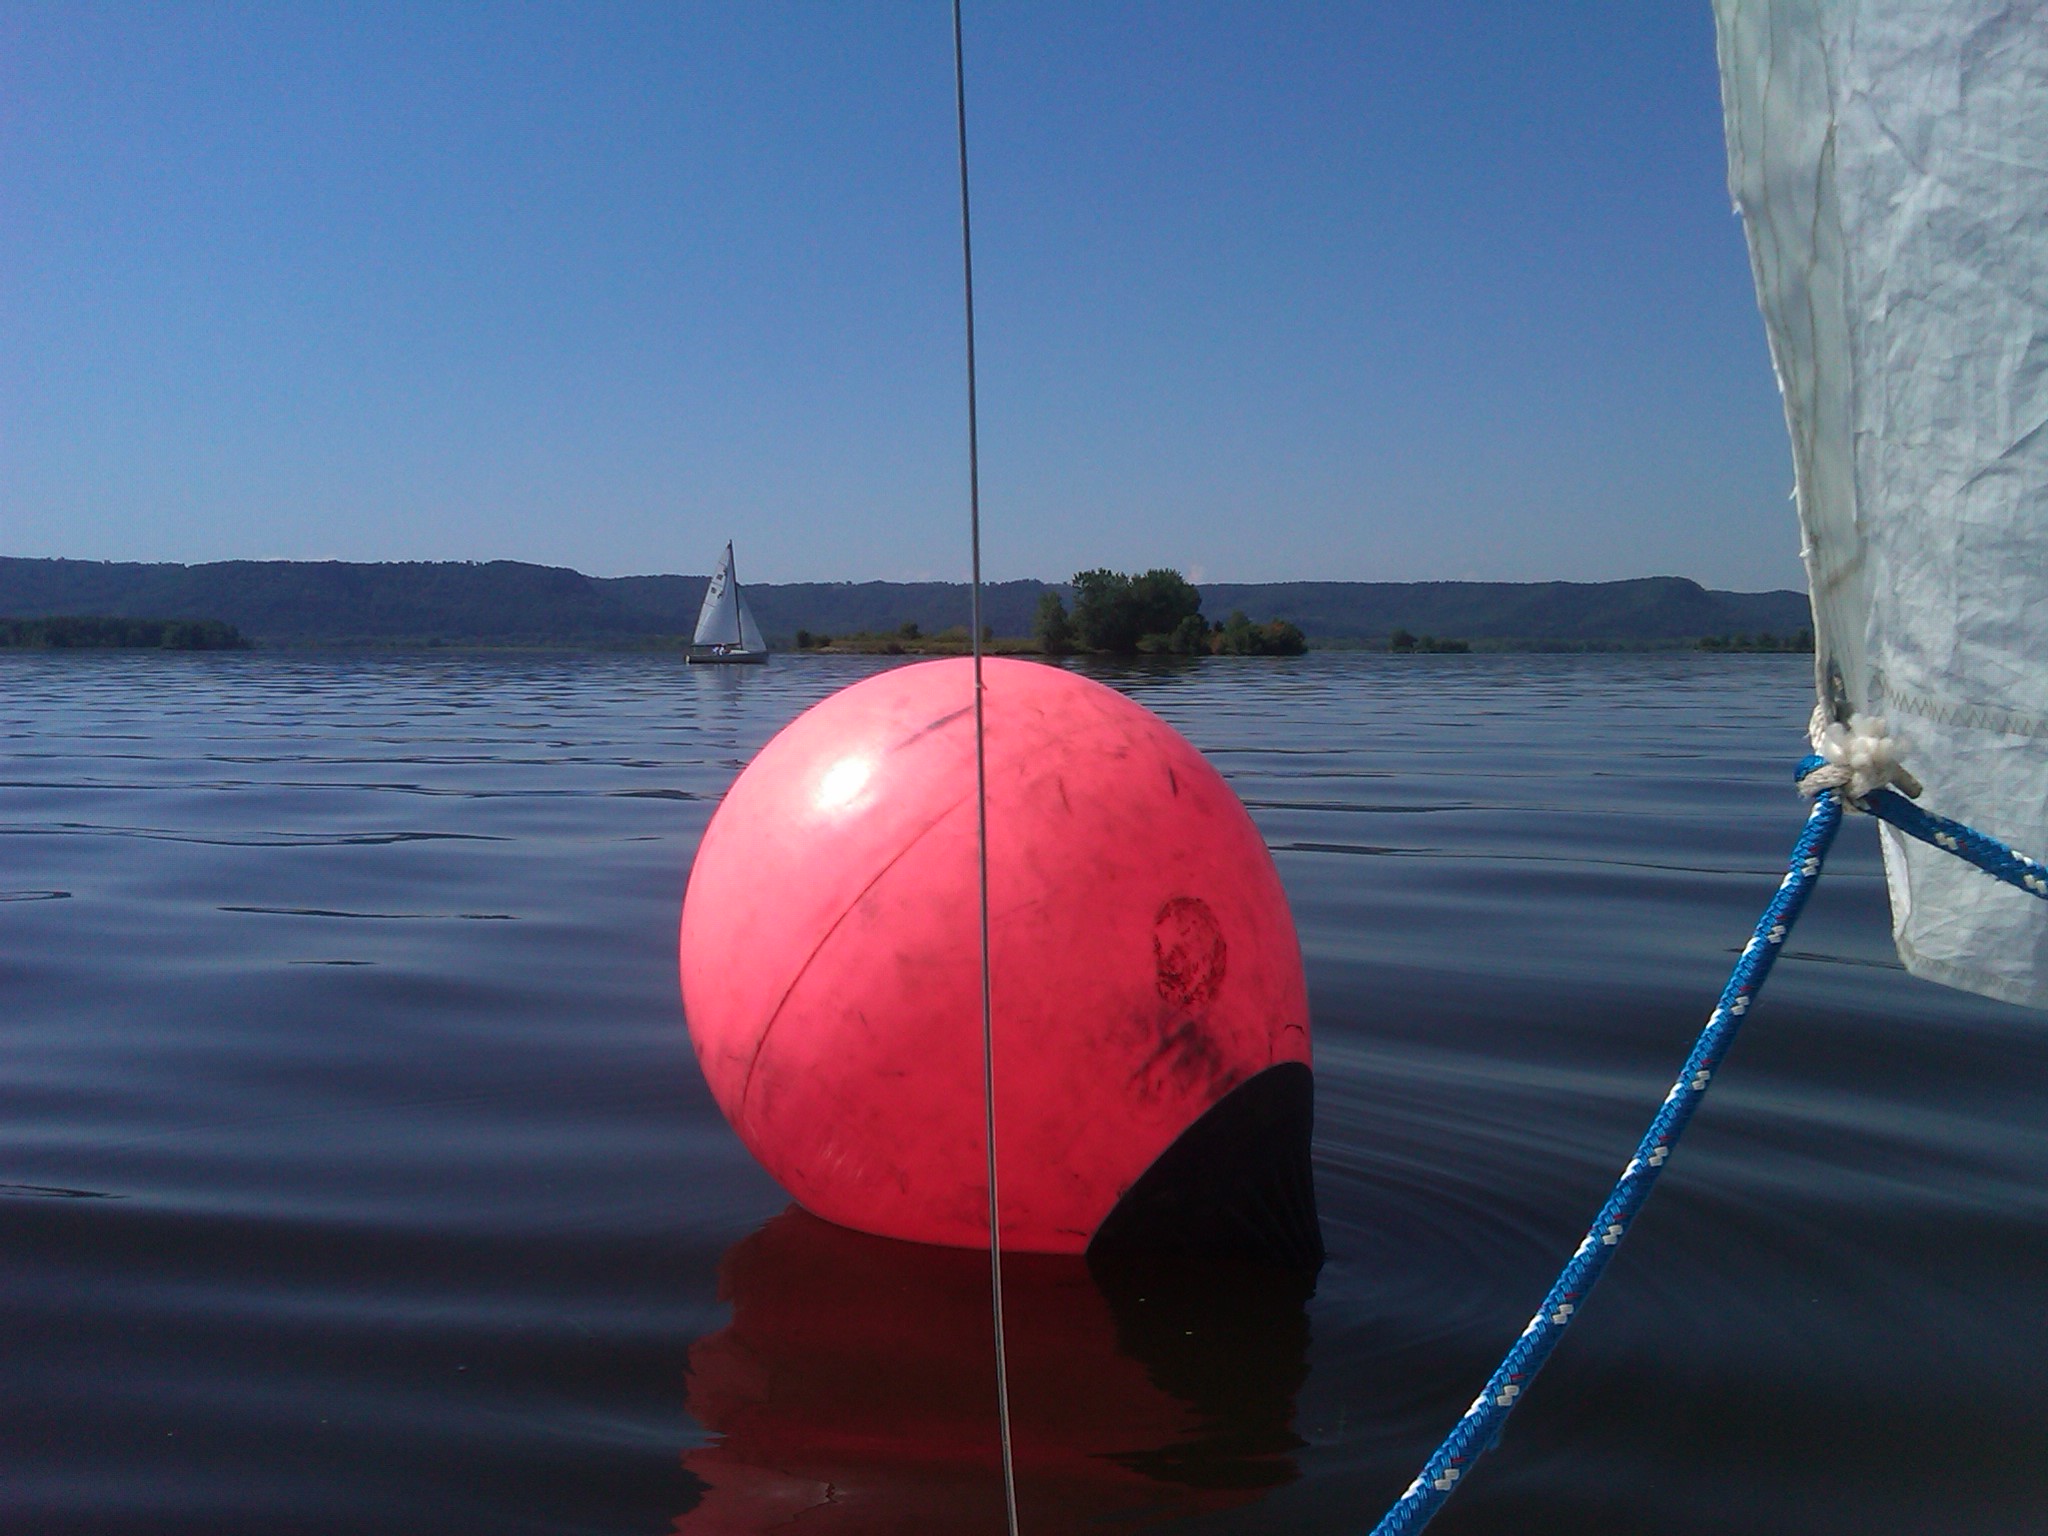 stalled at a racing buoy